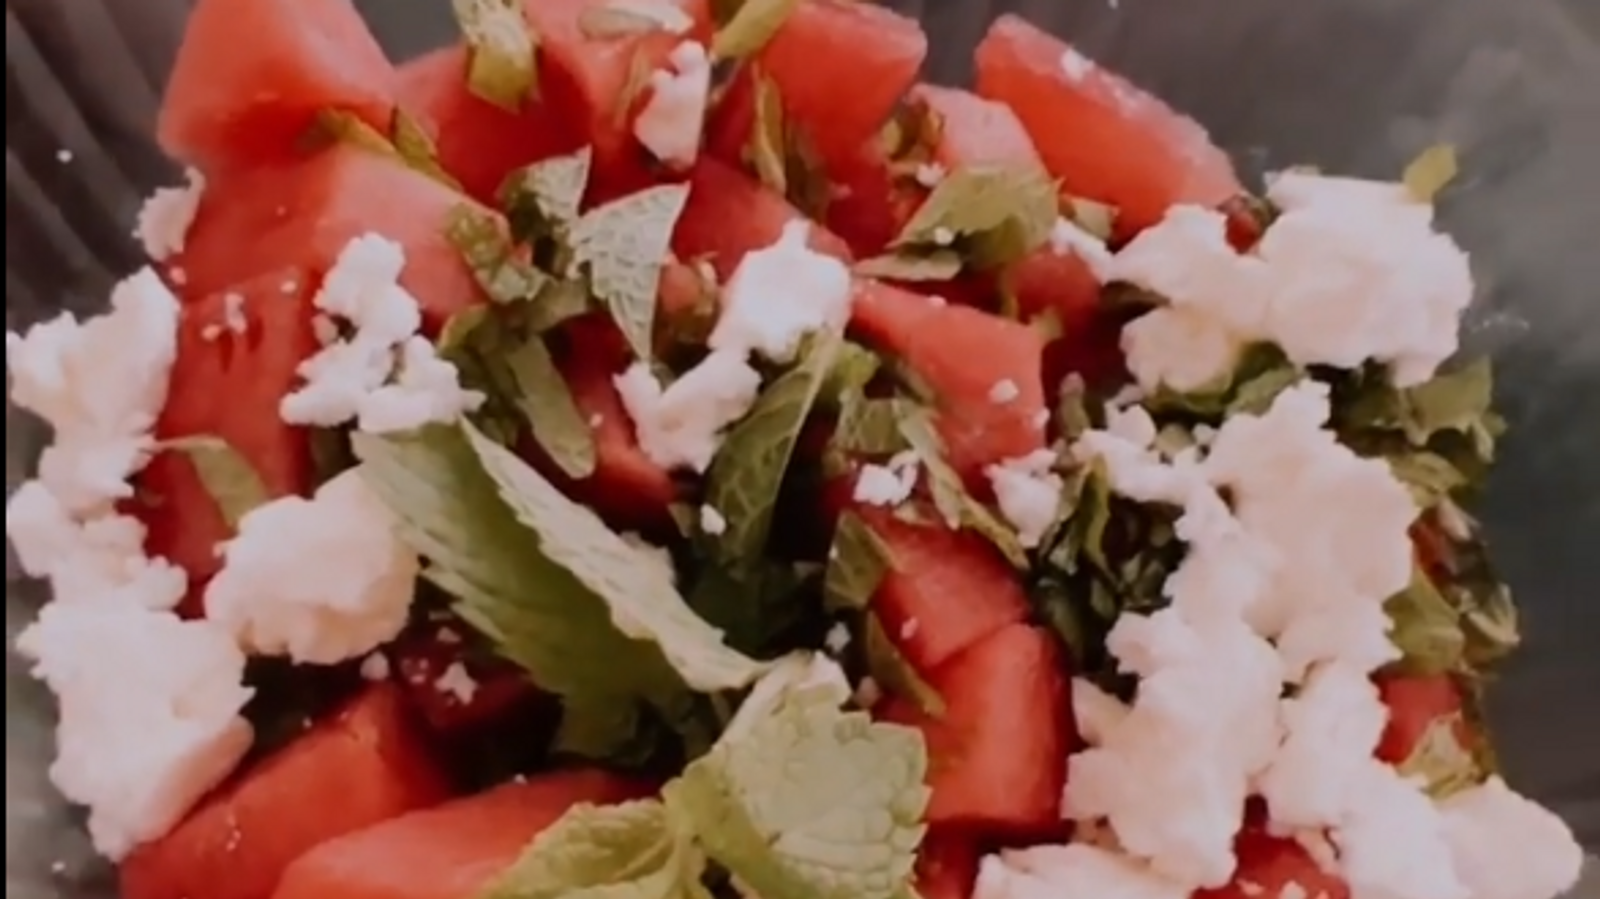 Cooking with Season - Watermelon Salad